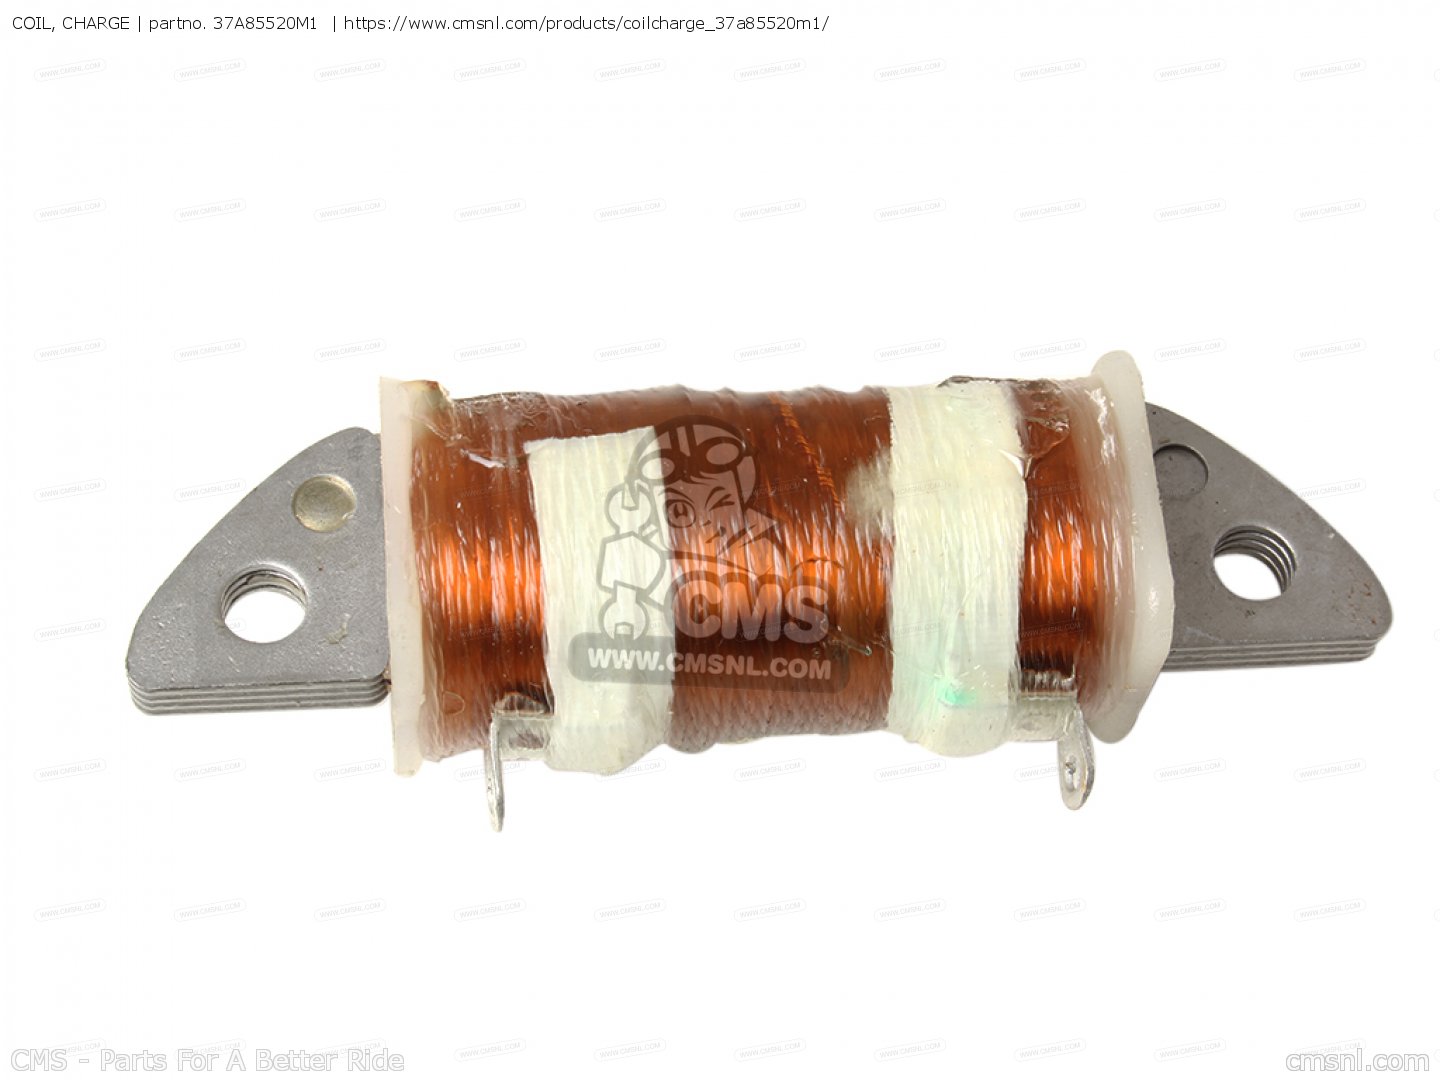 37A85520M1: Coil, Charge Yamaha - buy the 37A-85520-M1-00 at CMSNL